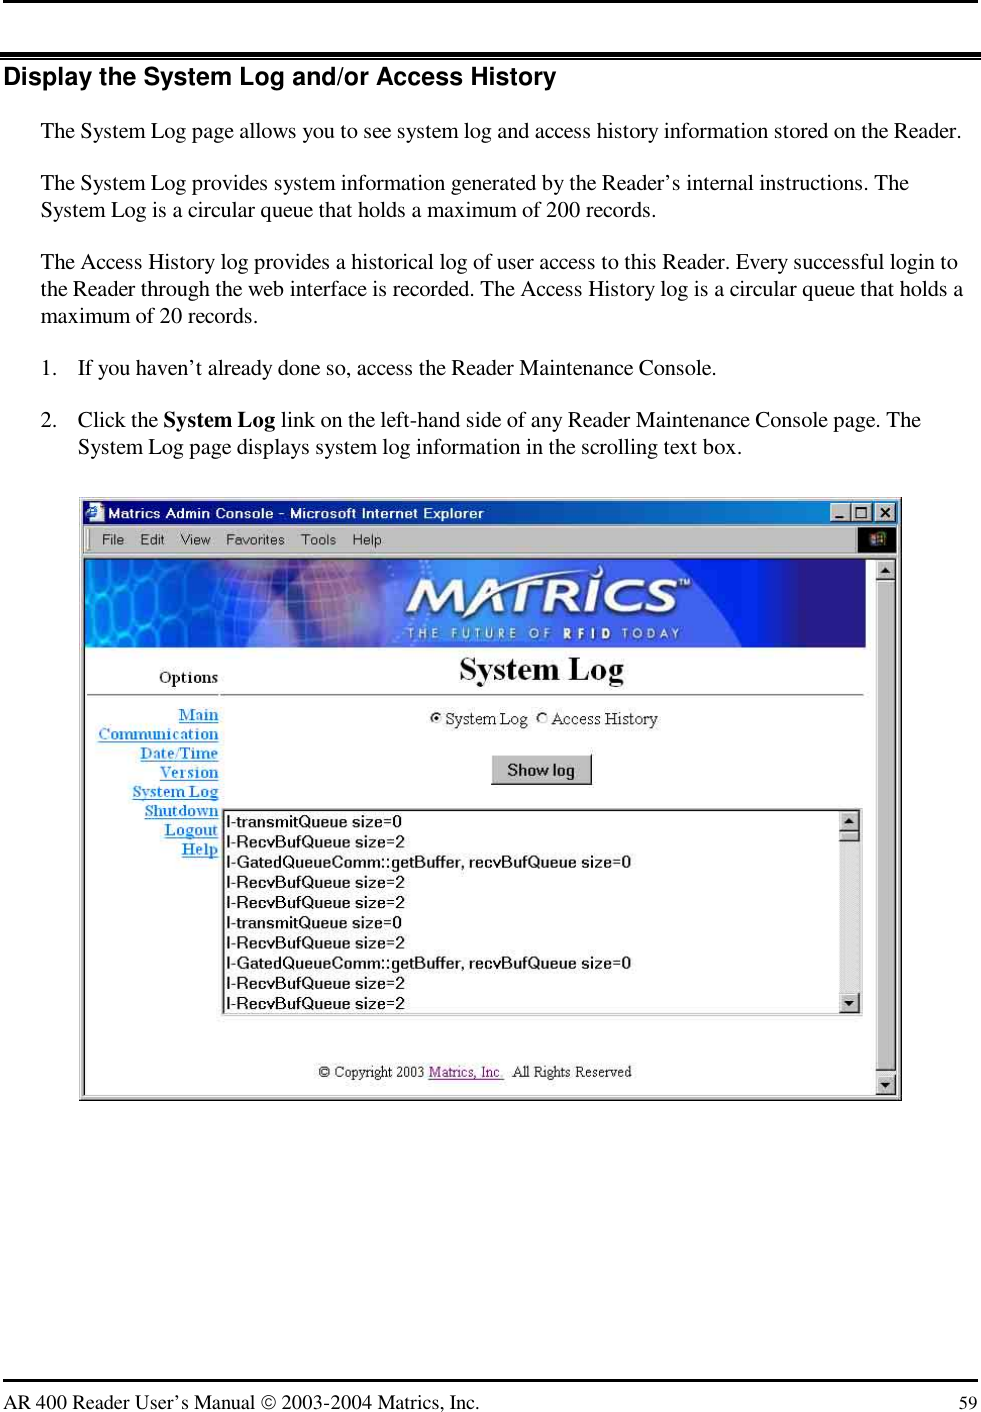   AR 400 Reader User’s Manual  2003-2004 Matrics, Inc.  59 Display the System Log and/or Access History The System Log page allows you to see system log and access history information stored on the Reader. The System Log provides system information generated by the Reader’s internal instructions. The System Log is a circular queue that holds a maximum of 200 records. The Access History log provides a historical log of user access to this Reader. Every successful login to the Reader through the web interface is recorded. The Access History log is a circular queue that holds a maximum of 20 records. 1.  If you haven’t already done so, access the Reader Maintenance Console. 2. Click the System Log link on the left-hand side of any Reader Maintenance Console page. The System Log page displays system log information in the scrolling text box.  